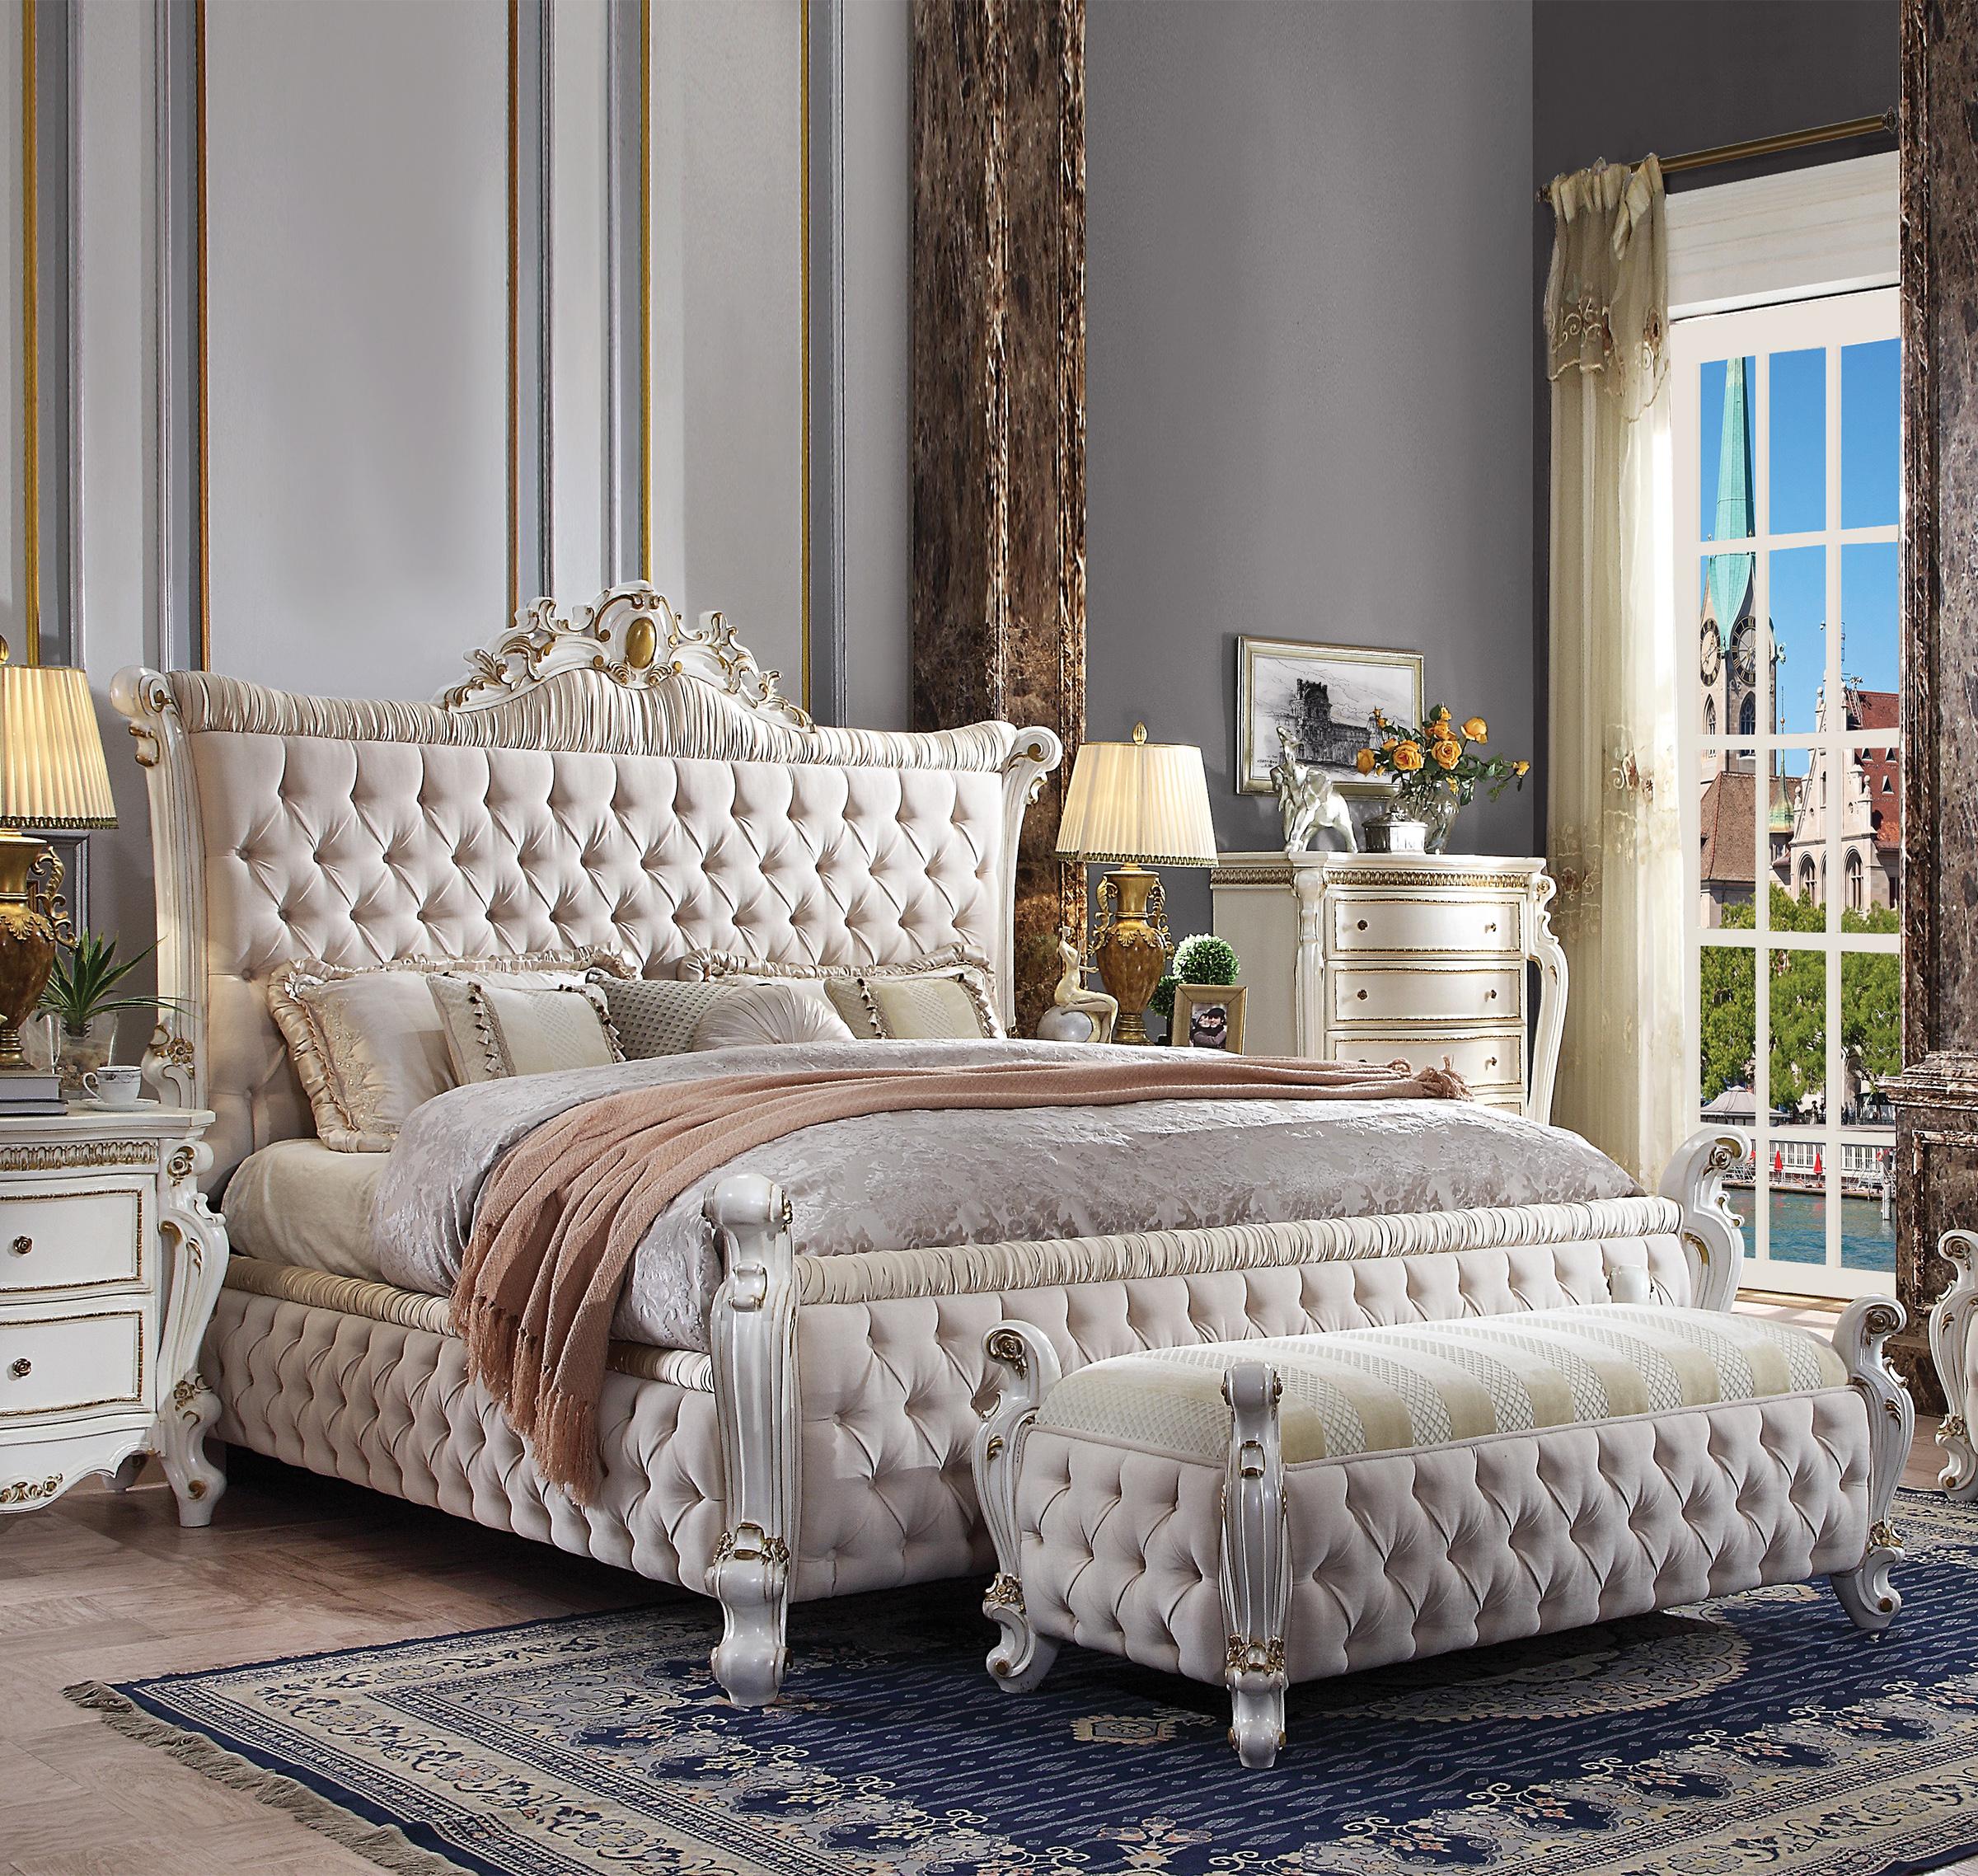 Classic, Traditional Panel Bed Picardy-27877EK Picardy-27877EK in Pearl, Antique Fabric